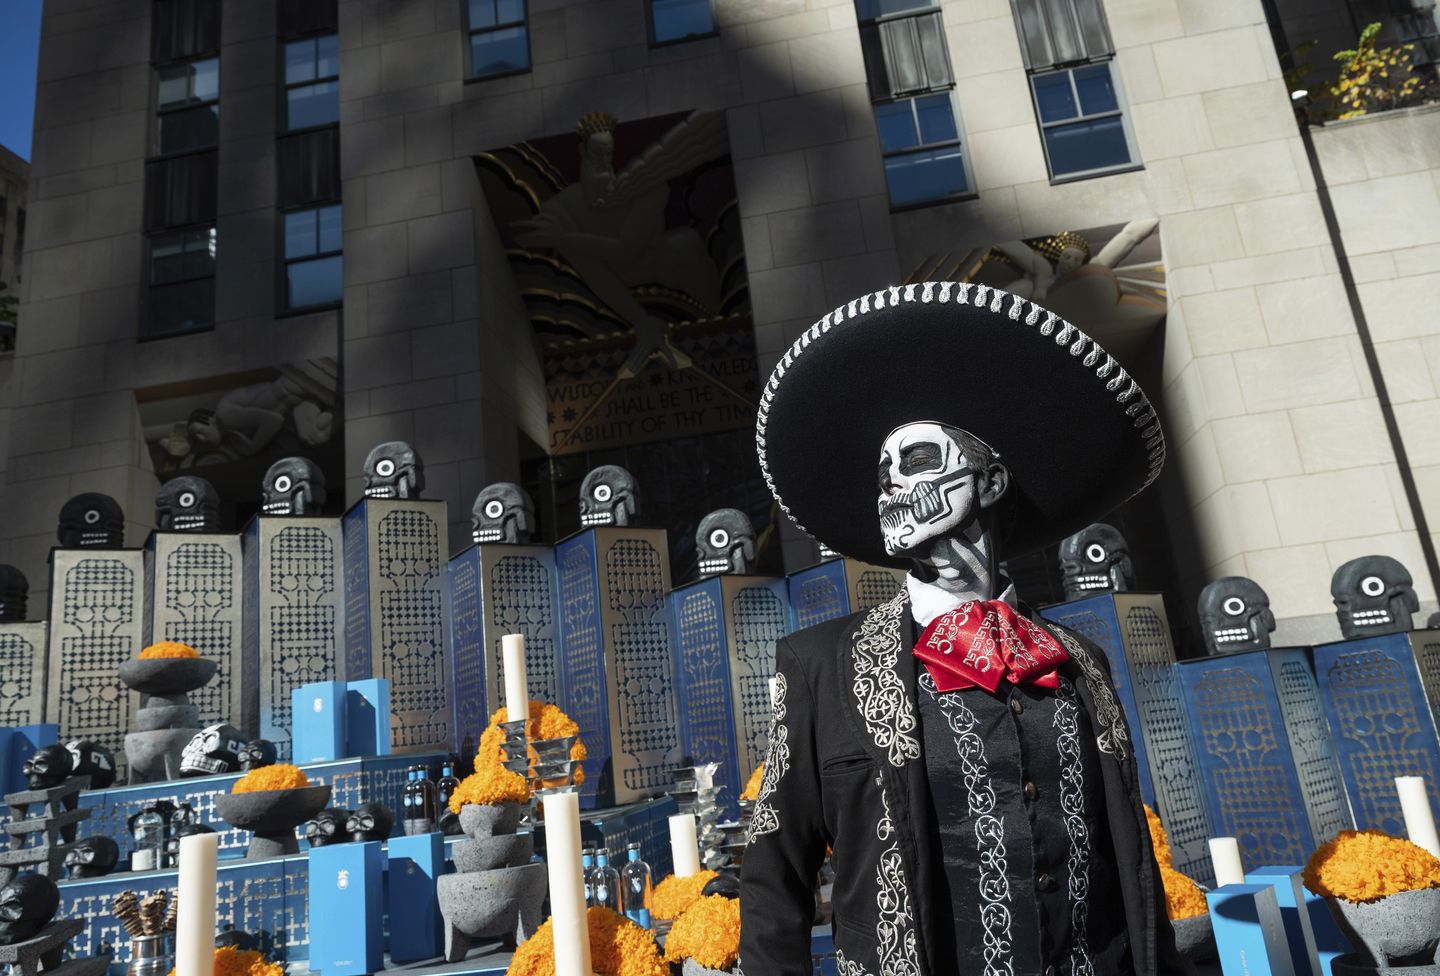 At 50, 'Day of the Dead' rituals have found home in U.S. families, commerce